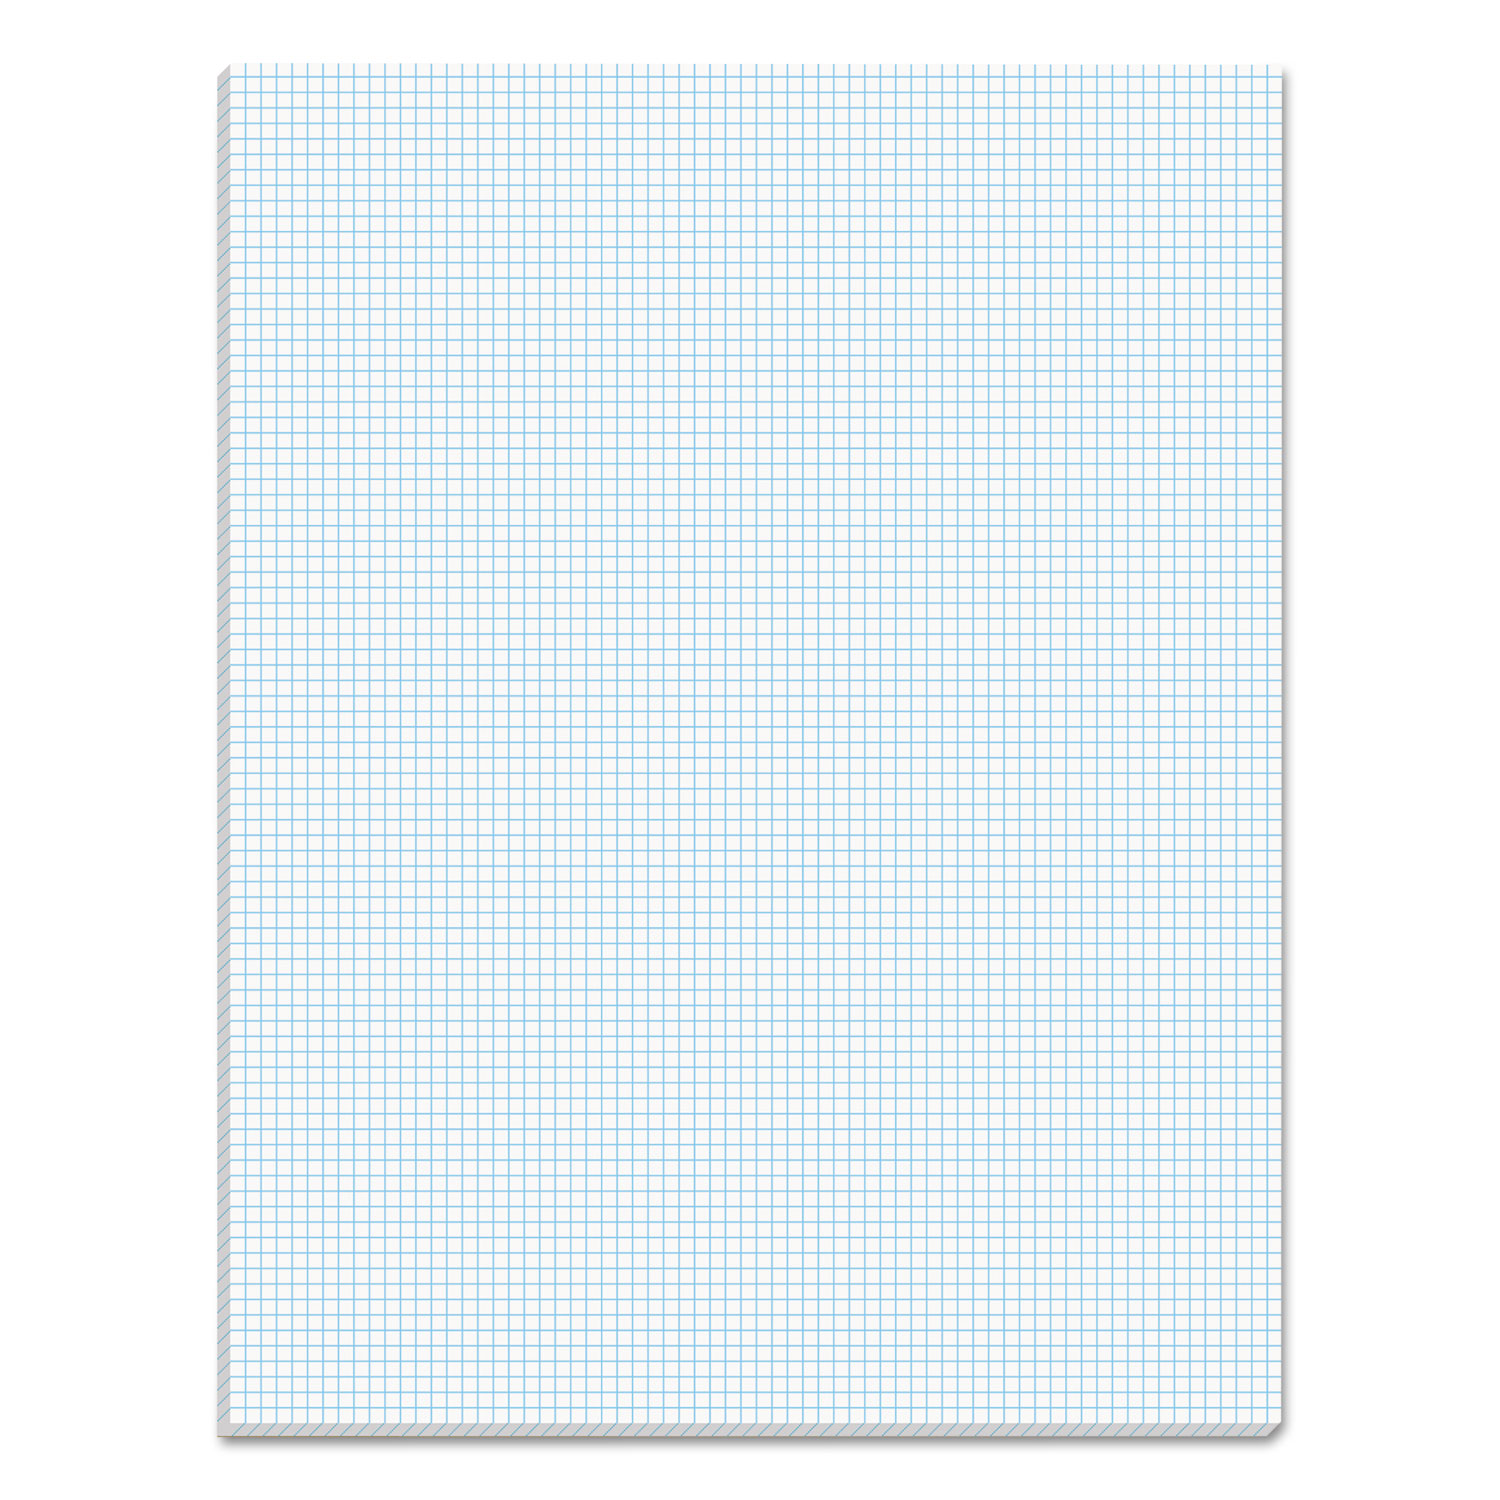  TOPS 33081 Quadrille Pads, 8 sq/in Quadrille Rule, 8.5 x 11, White, 50 Sheets (TOP33081) 